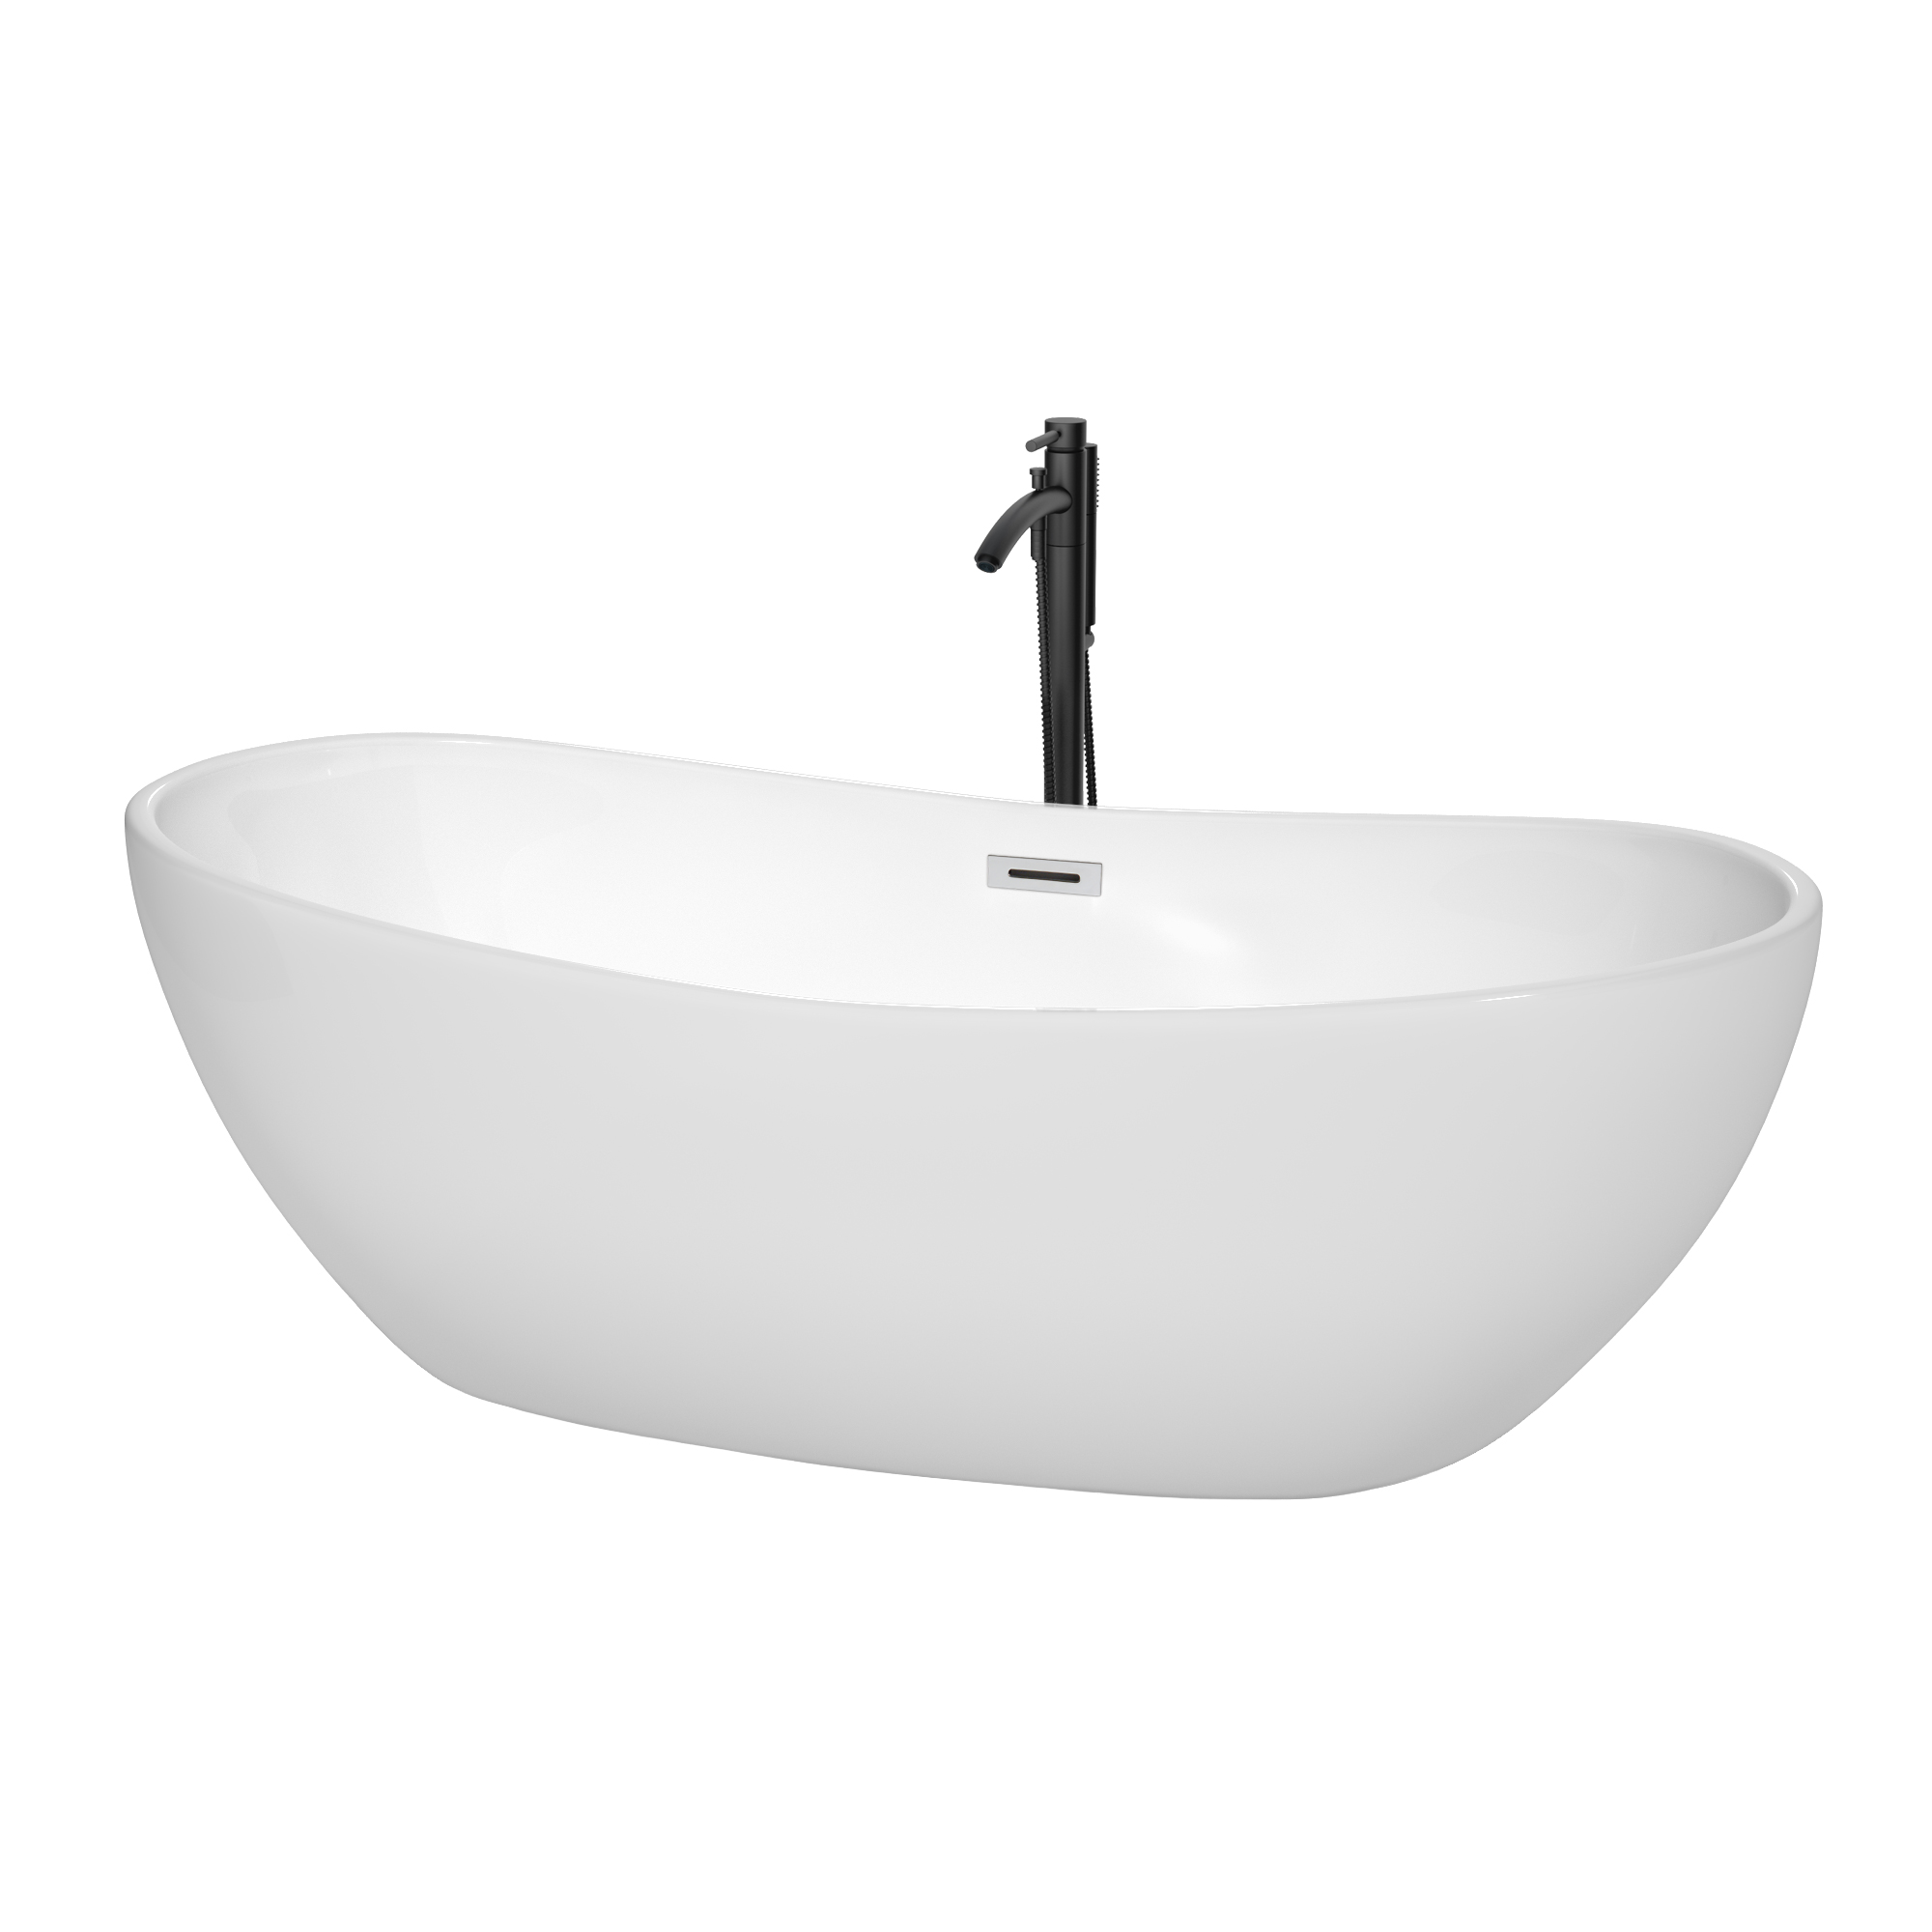 70" Freestanding Bathtub in White with Polished Chrome Trim and Floor Mounted Faucet in Matte Black